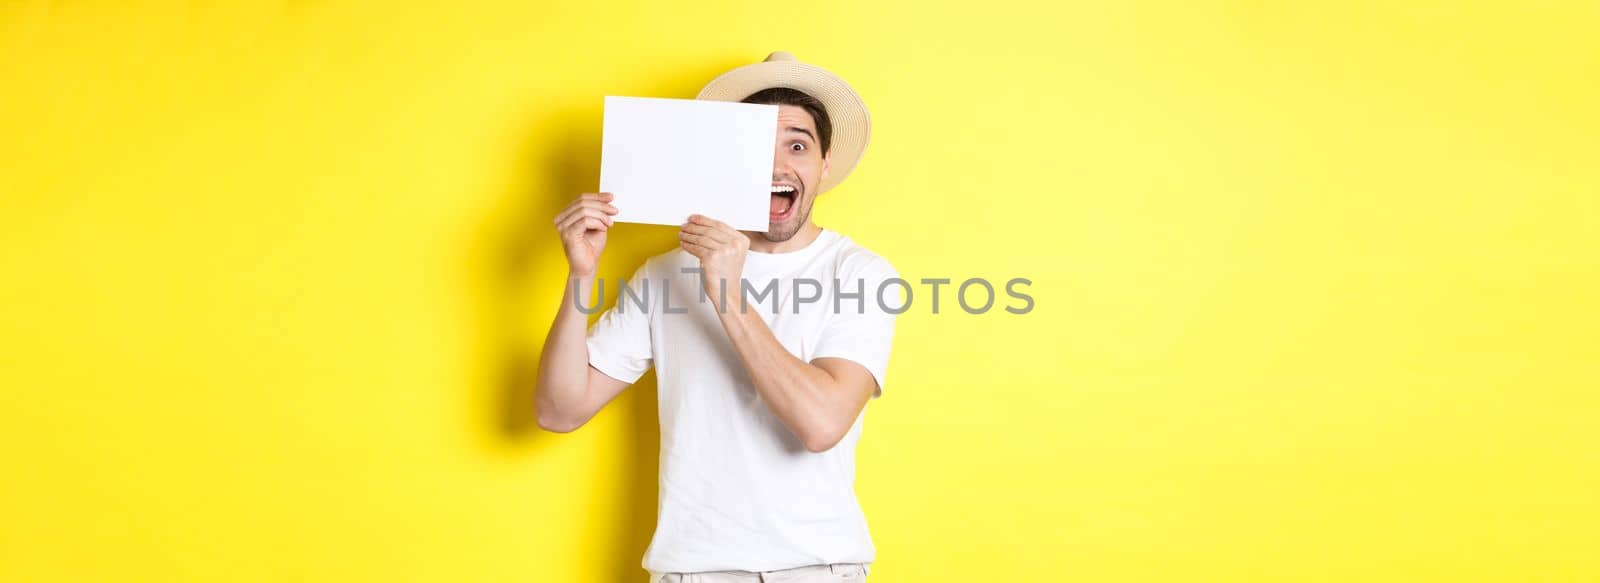 Excited tourist on vacation showing blank piece of paper for your logo, holding sign near face and smiling, standing against yellow background.